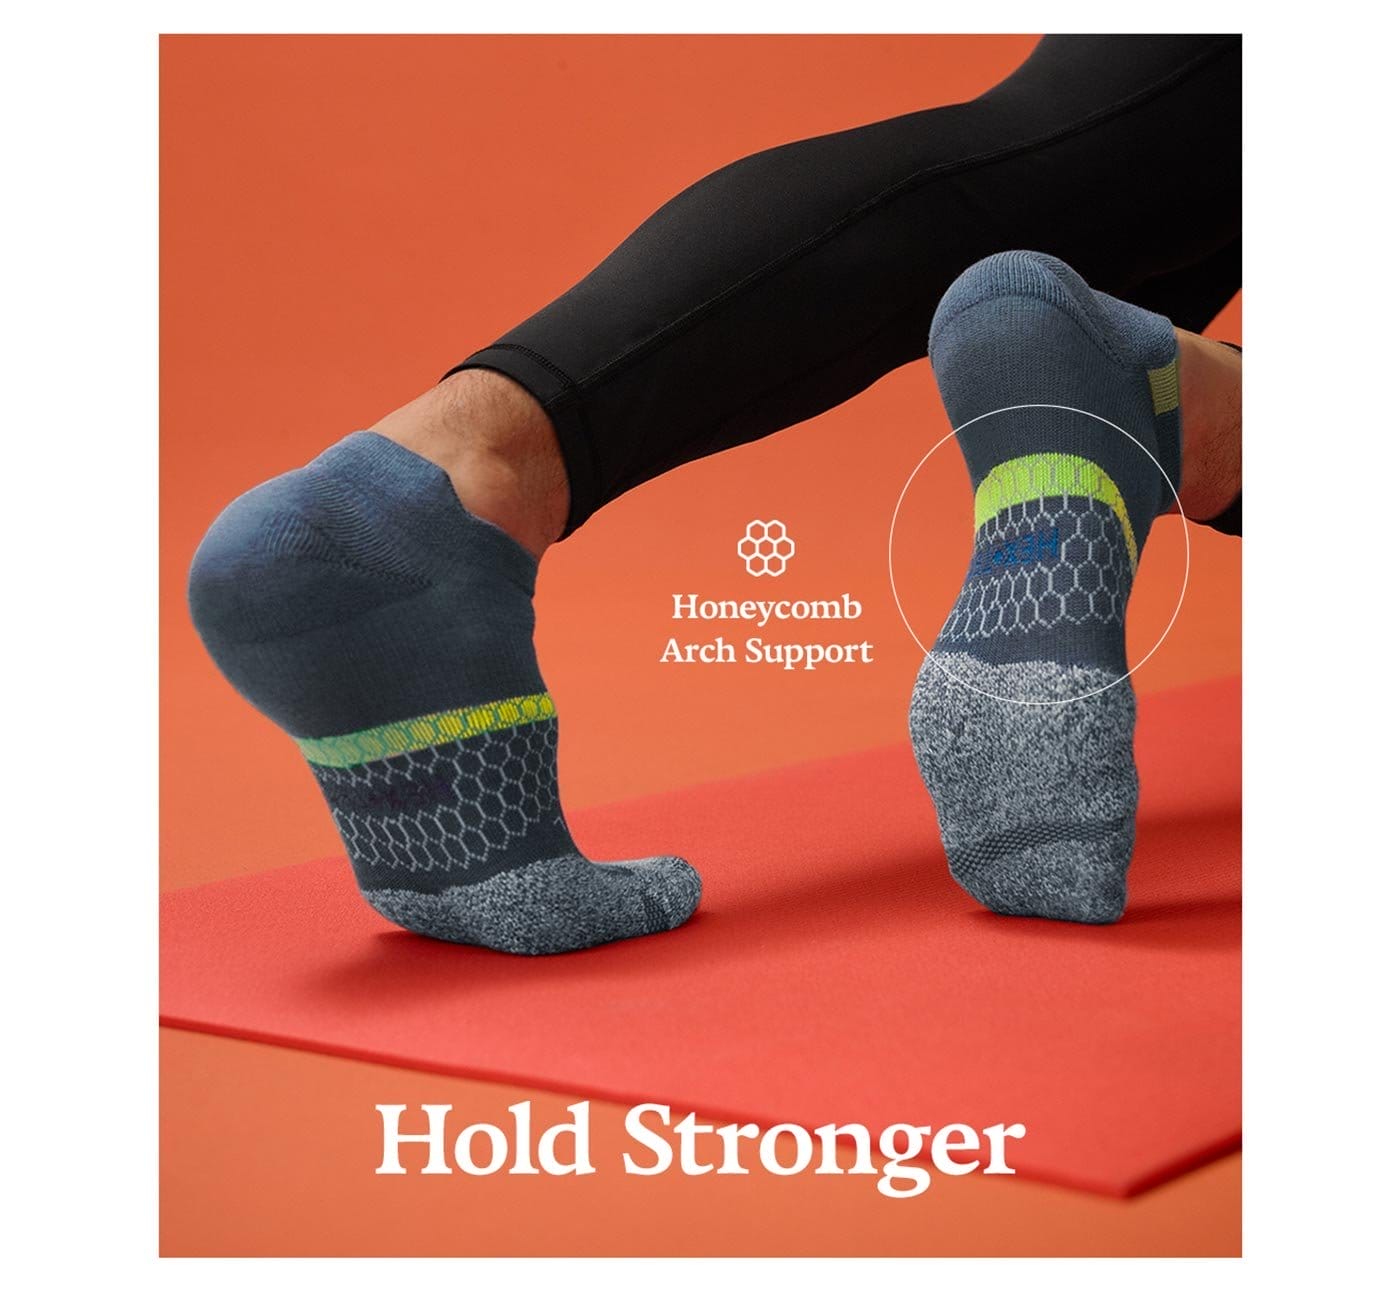 Honeycomb Arch Support | Hold Stronger